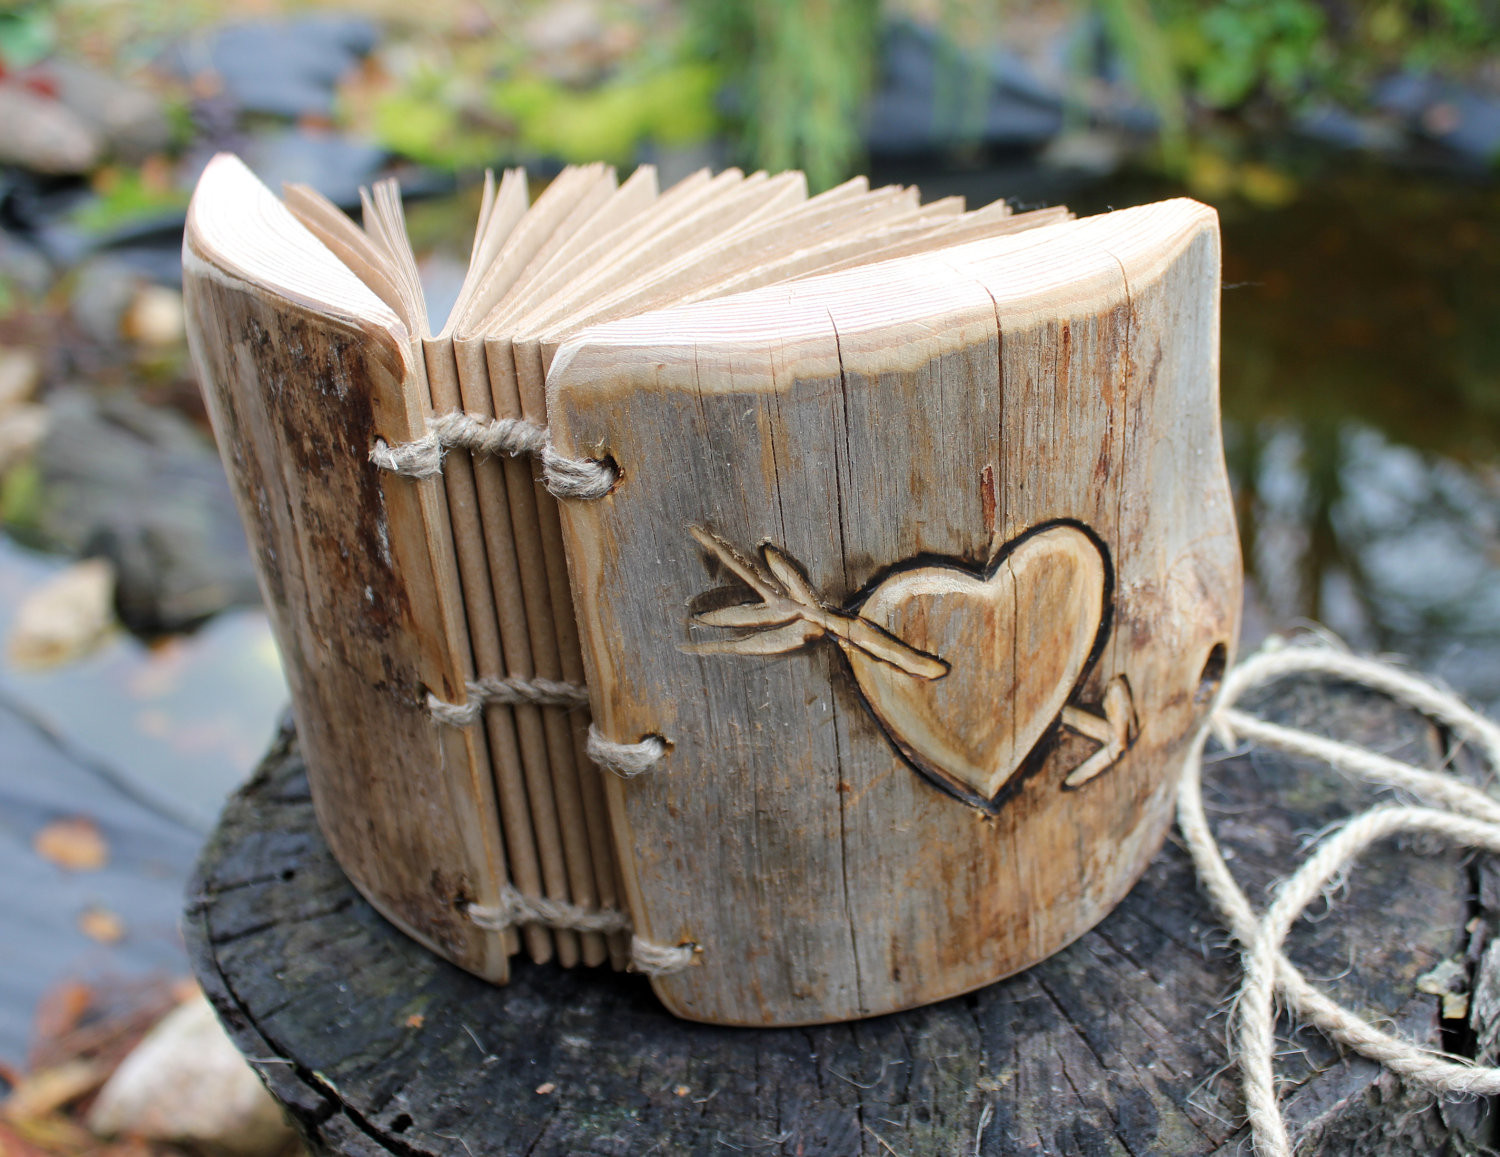 Rustic Guest Book For Wedding
 Wedding guest book wood rustic wedding guest book by crearting